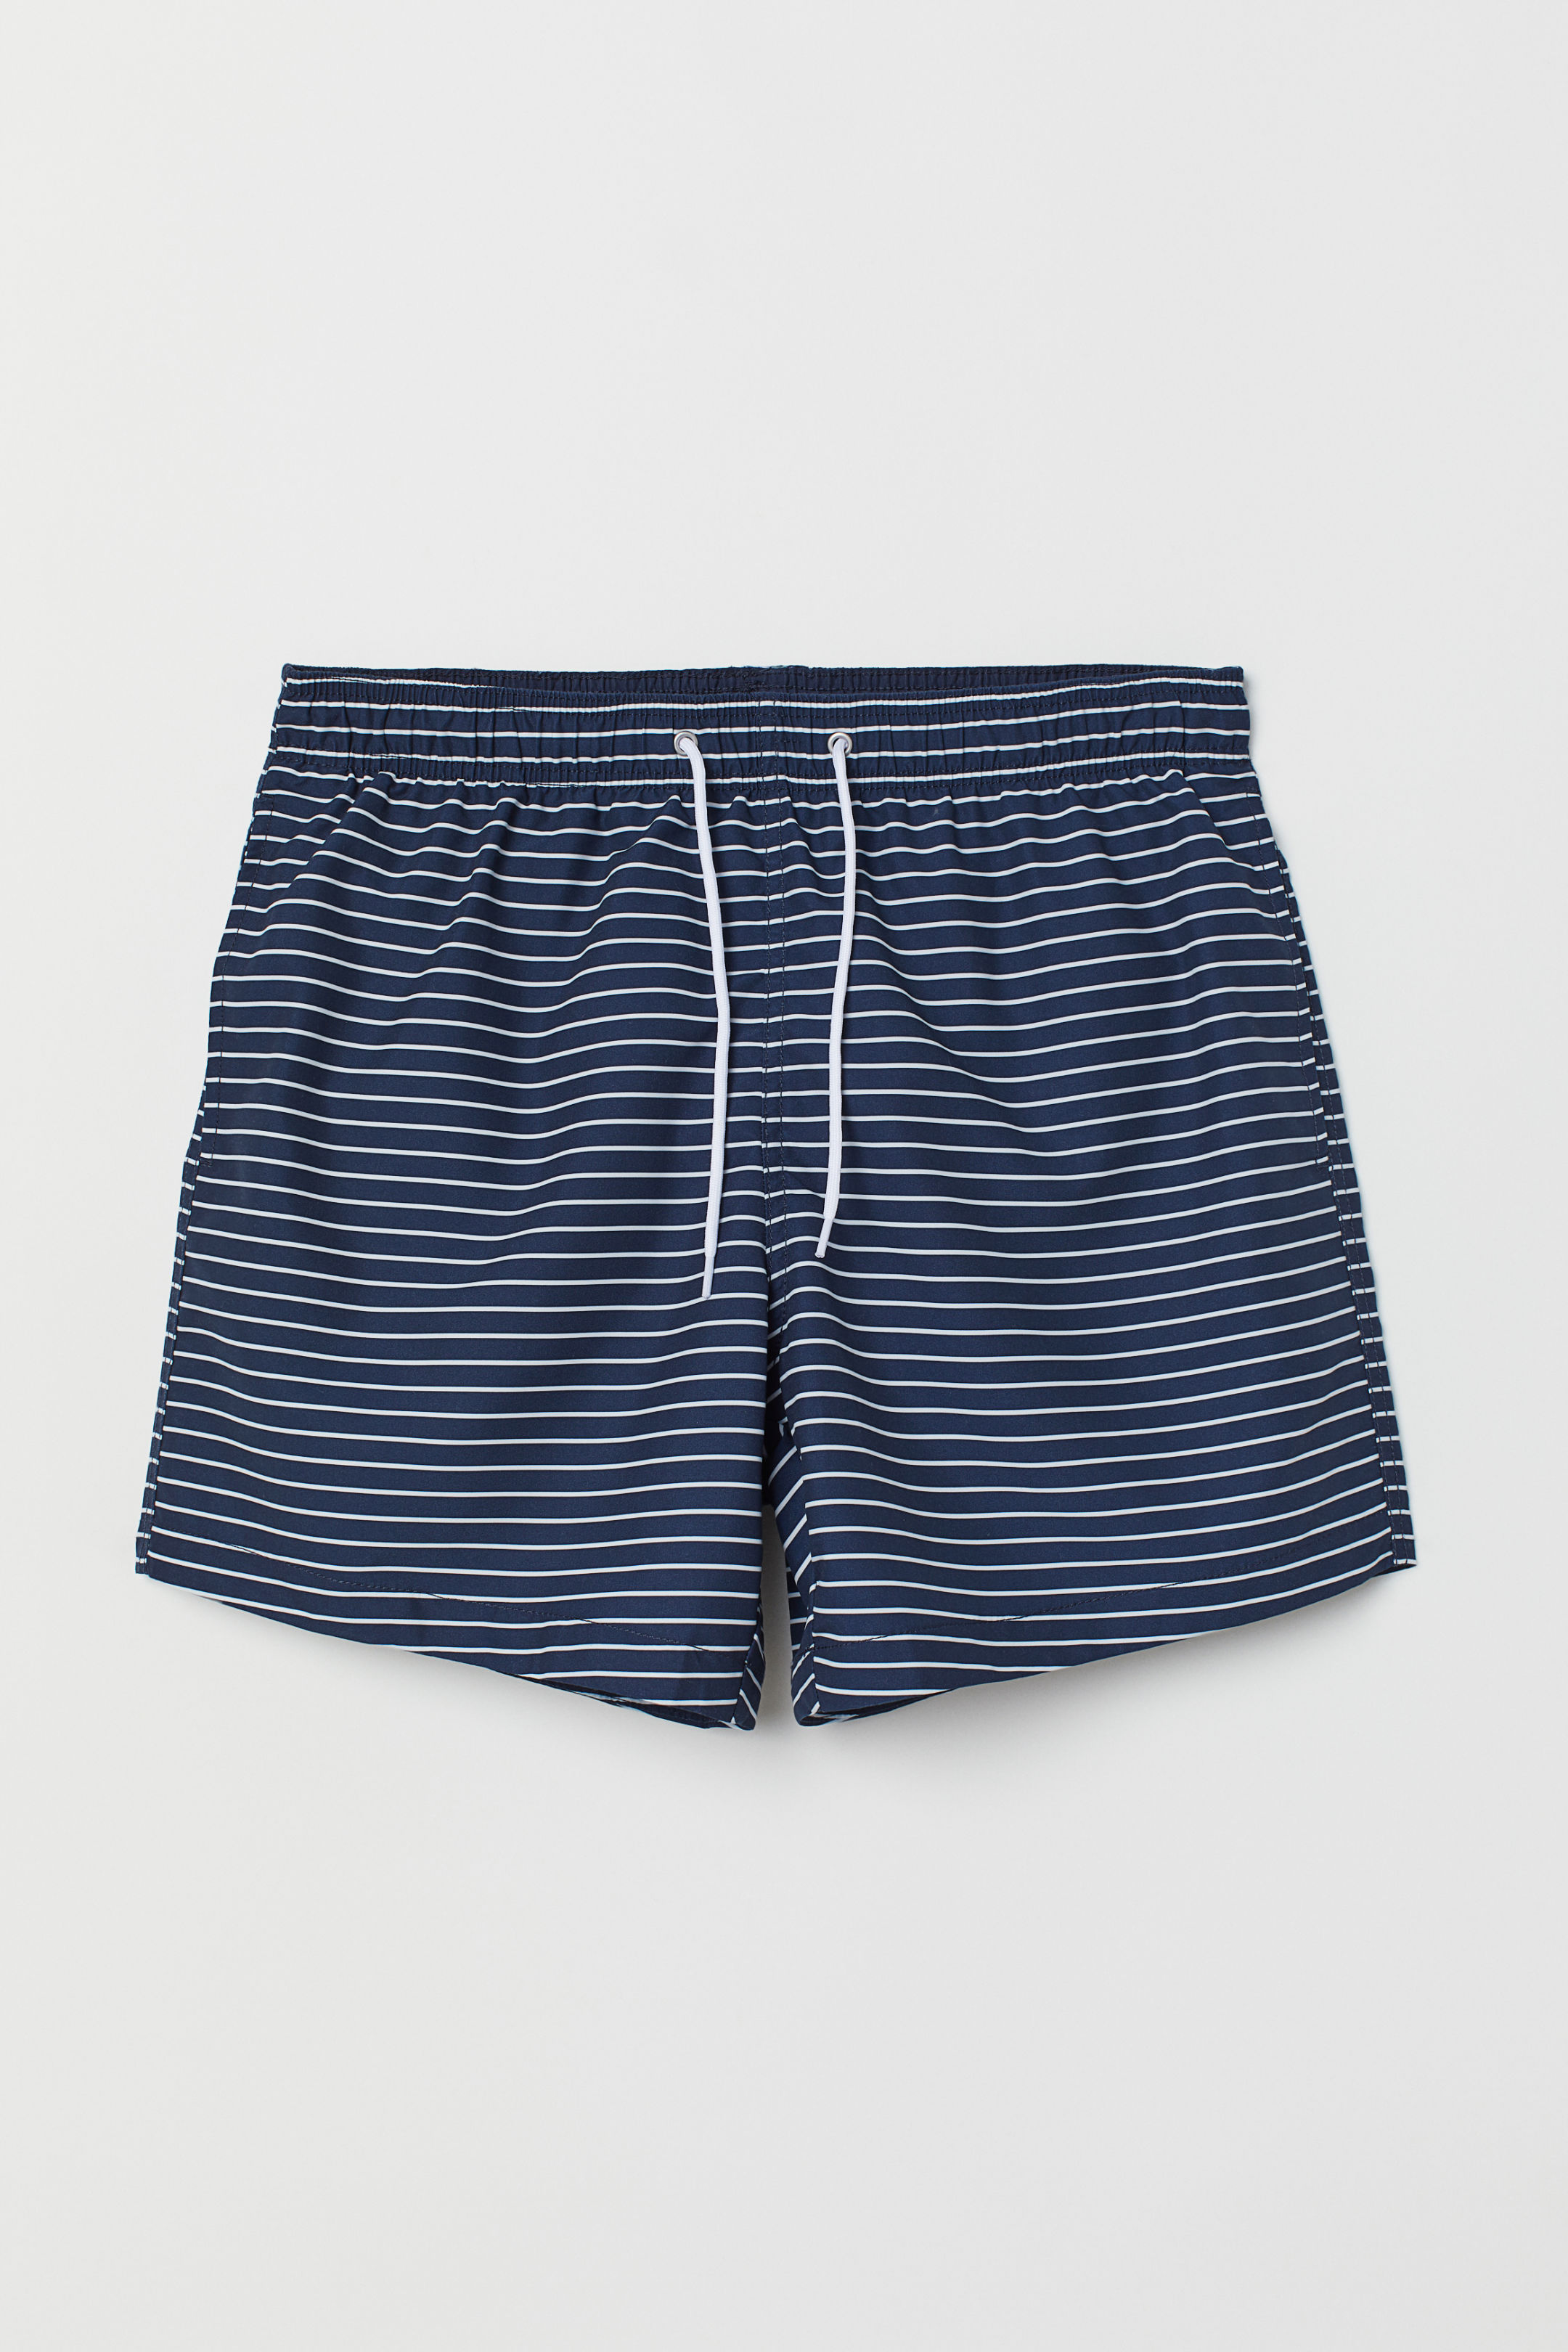 Two Fun New Swim Trunks — The Property Lovers